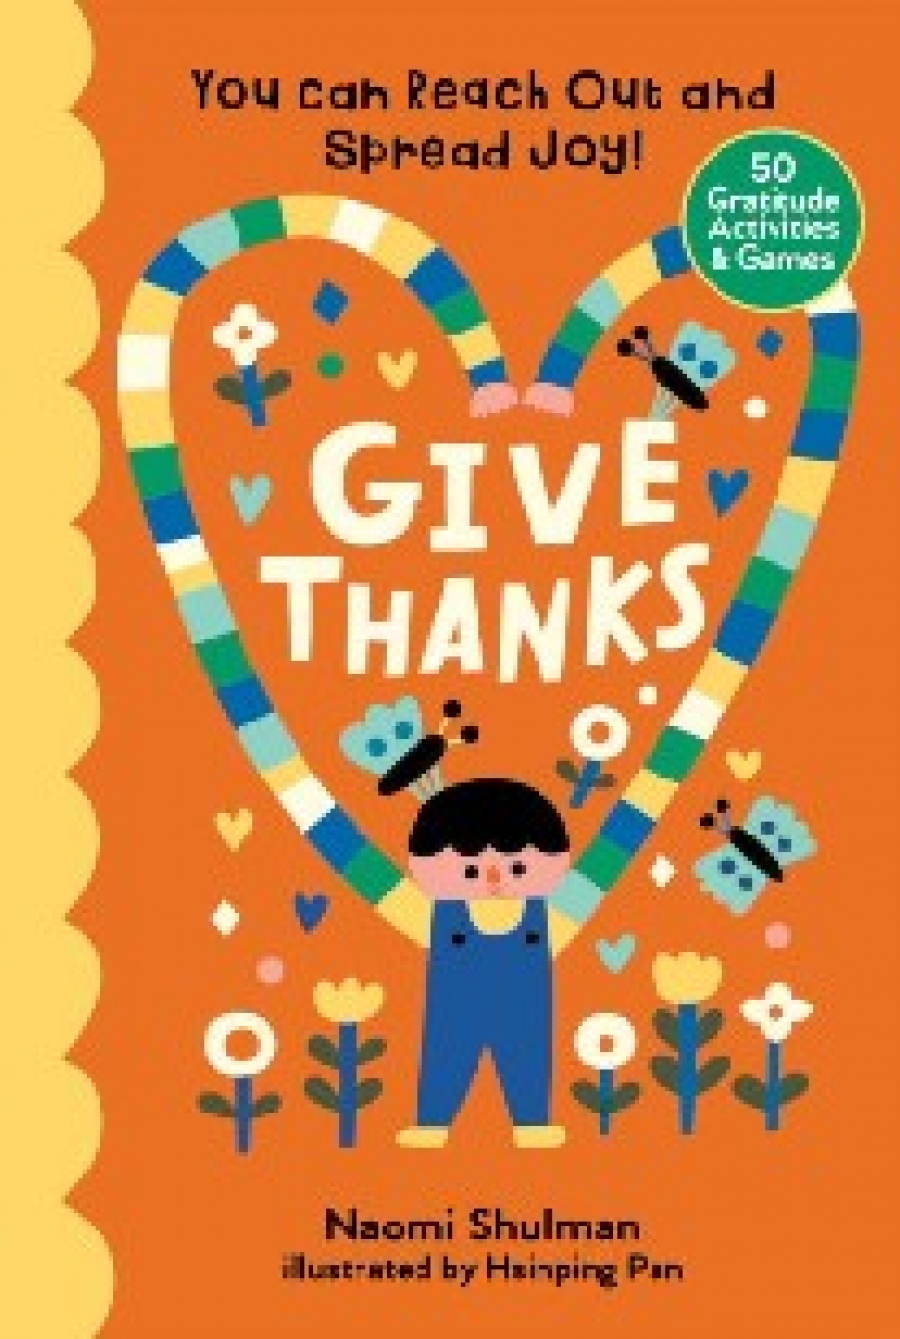 Shulman Naomi Give thanks: you can reach out and spread joy! 50 gratitude activities & games 